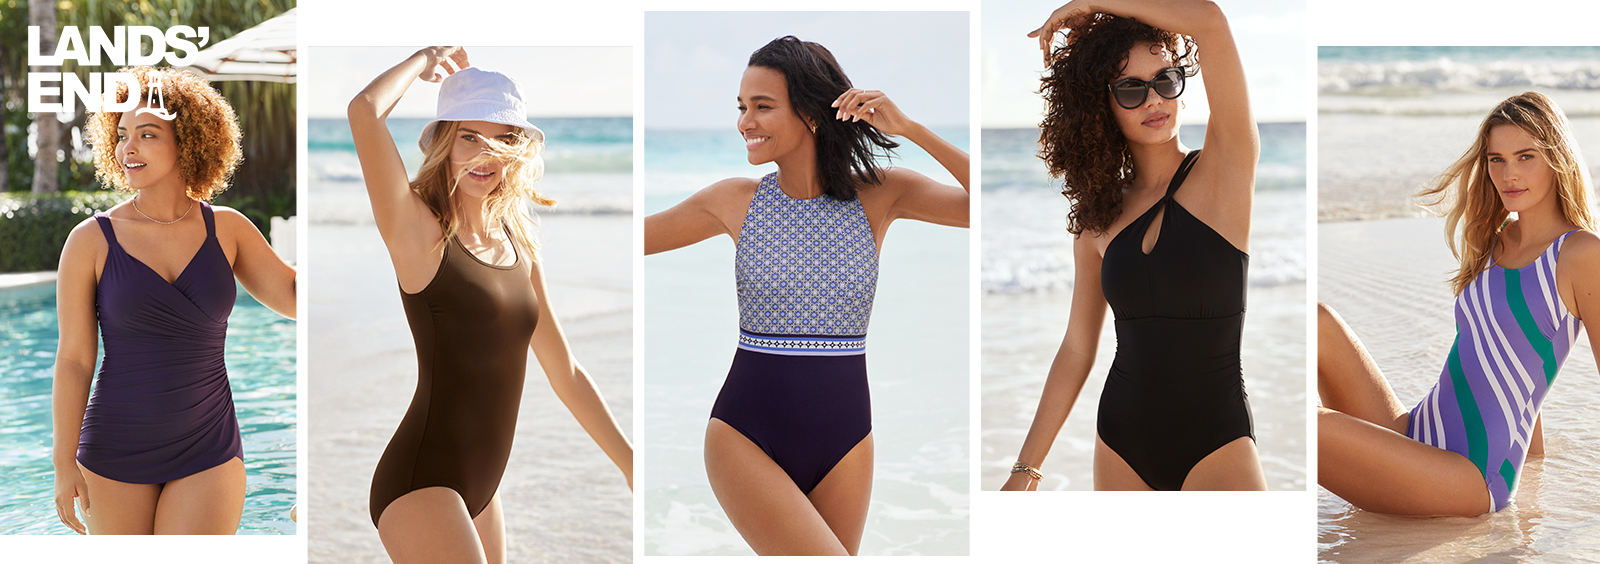 Tips on the best swimsuits for women over 50 who swim laps to exercise, from added coverage and support to transitioning from the pool to the evening, and everything in between.